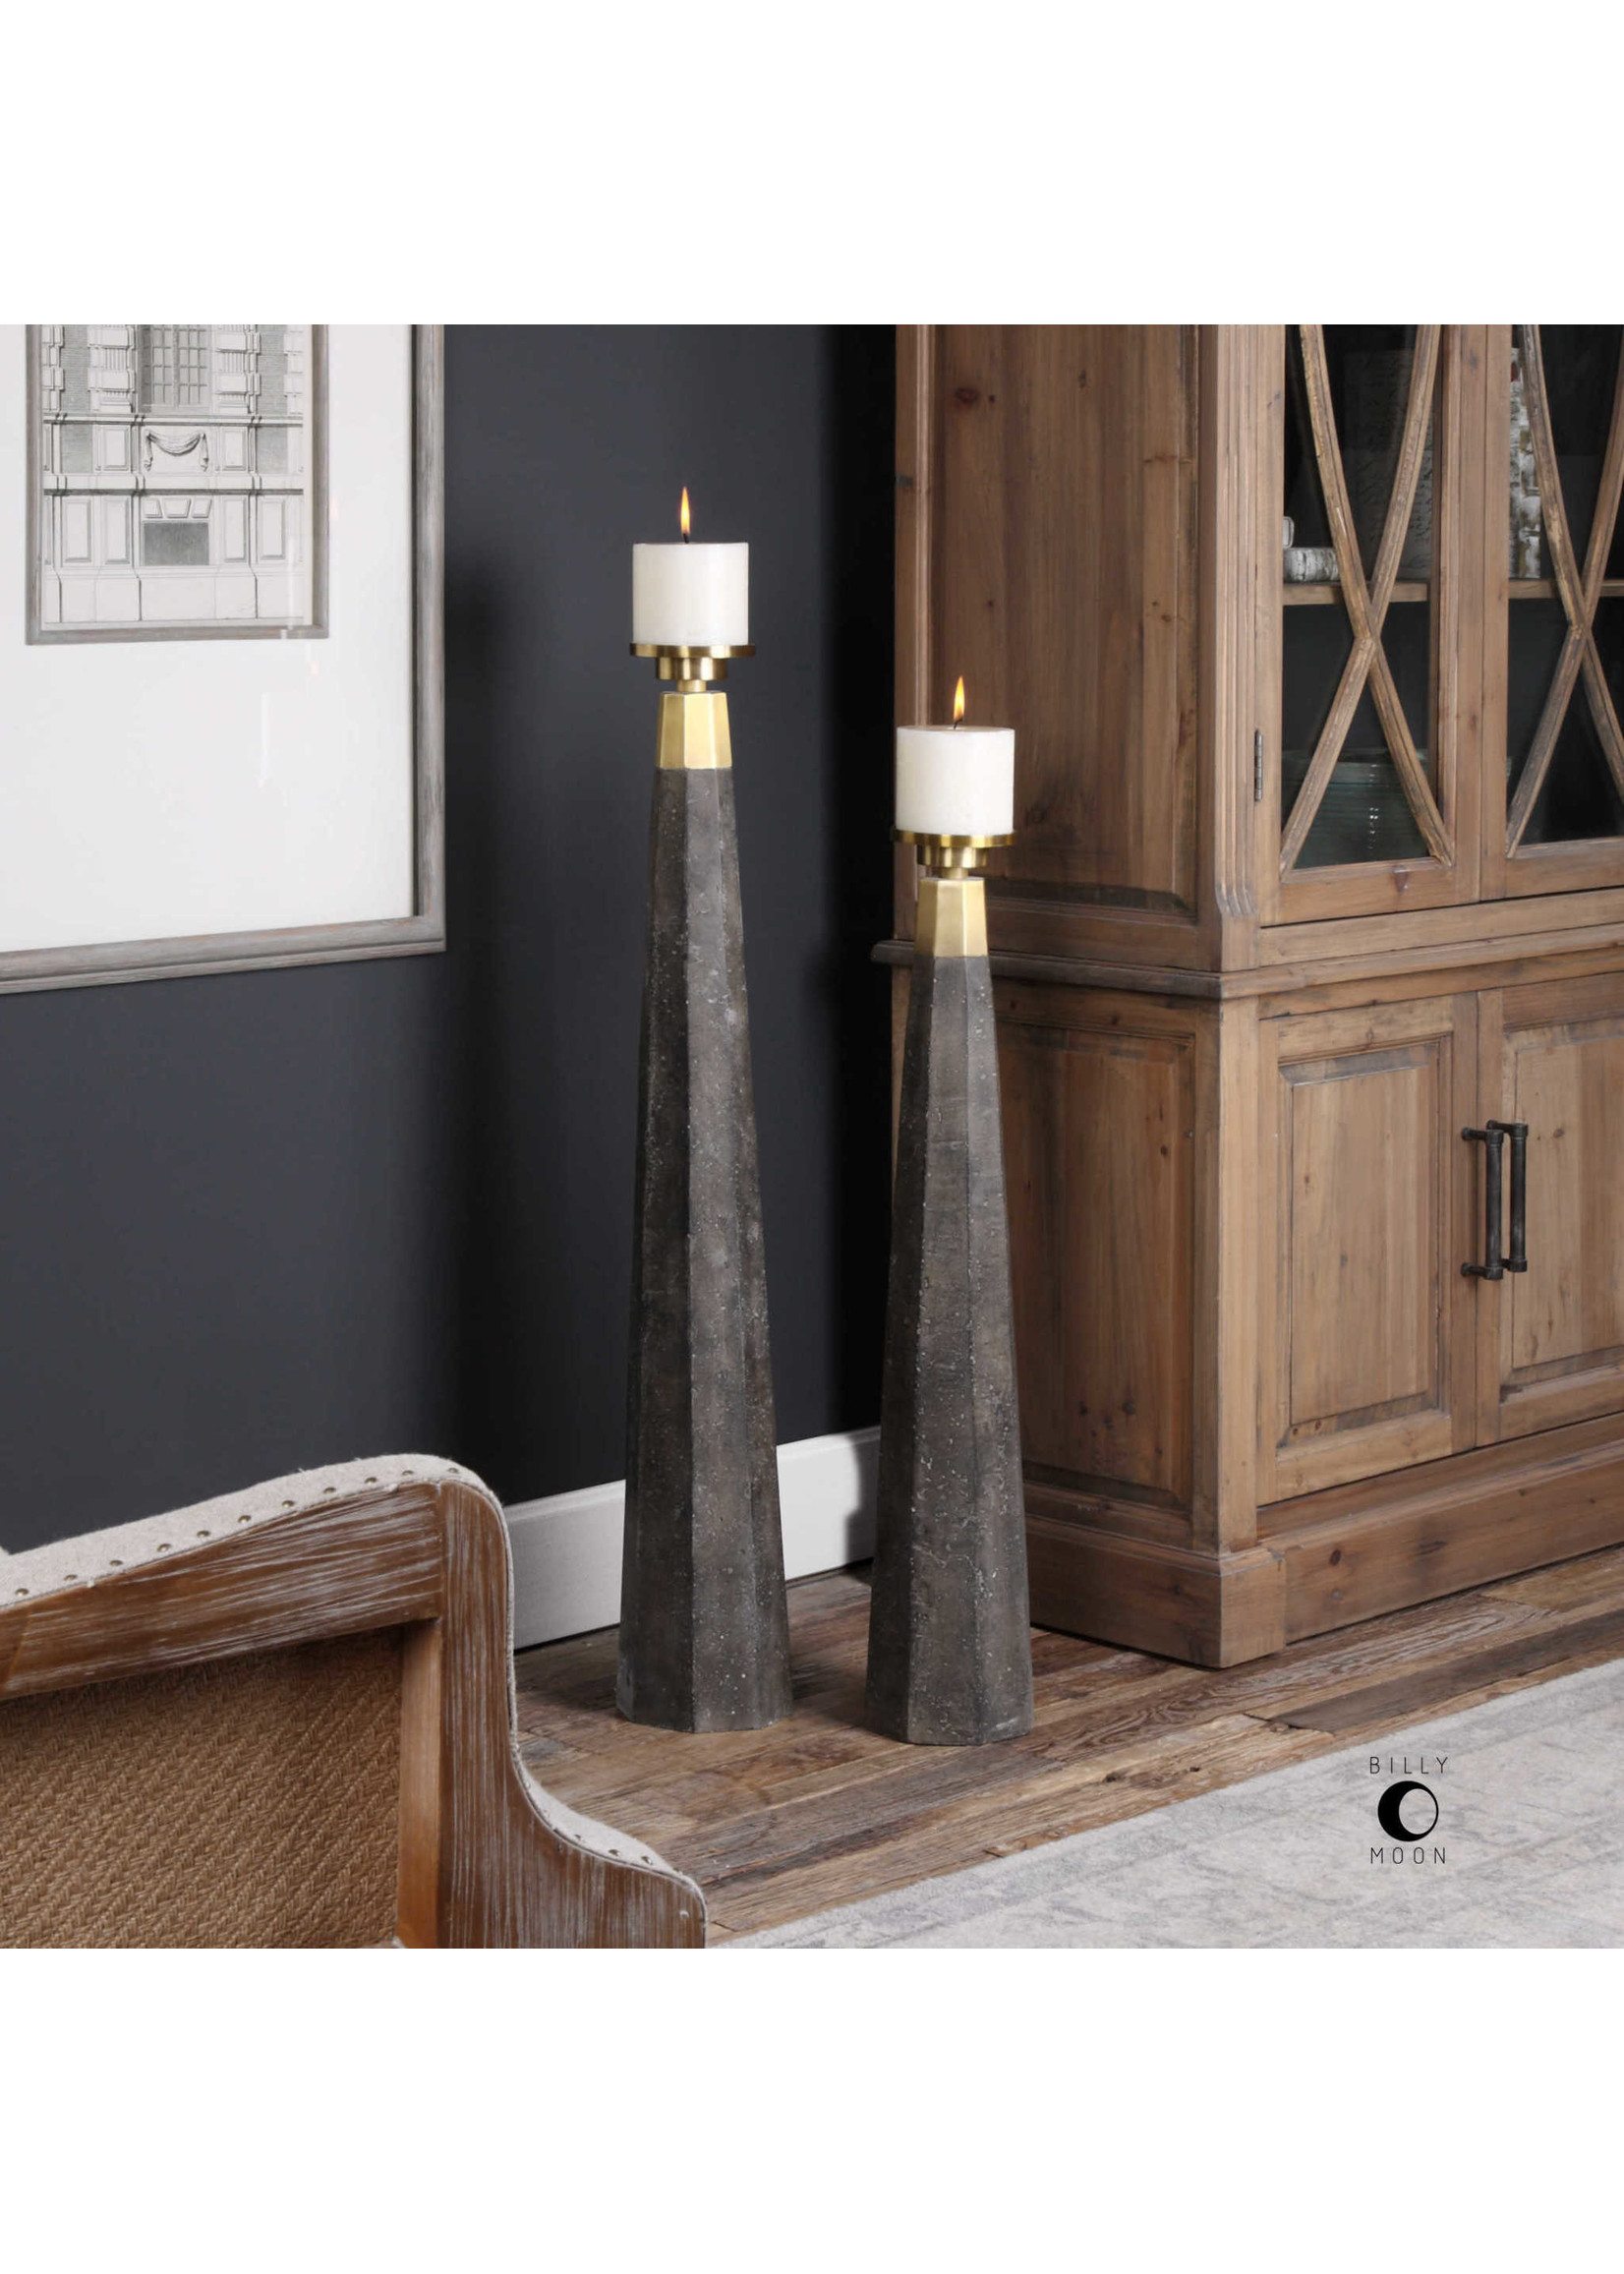 Uttermost / Revelation Pons Candleholder with Pillar Candle - Small